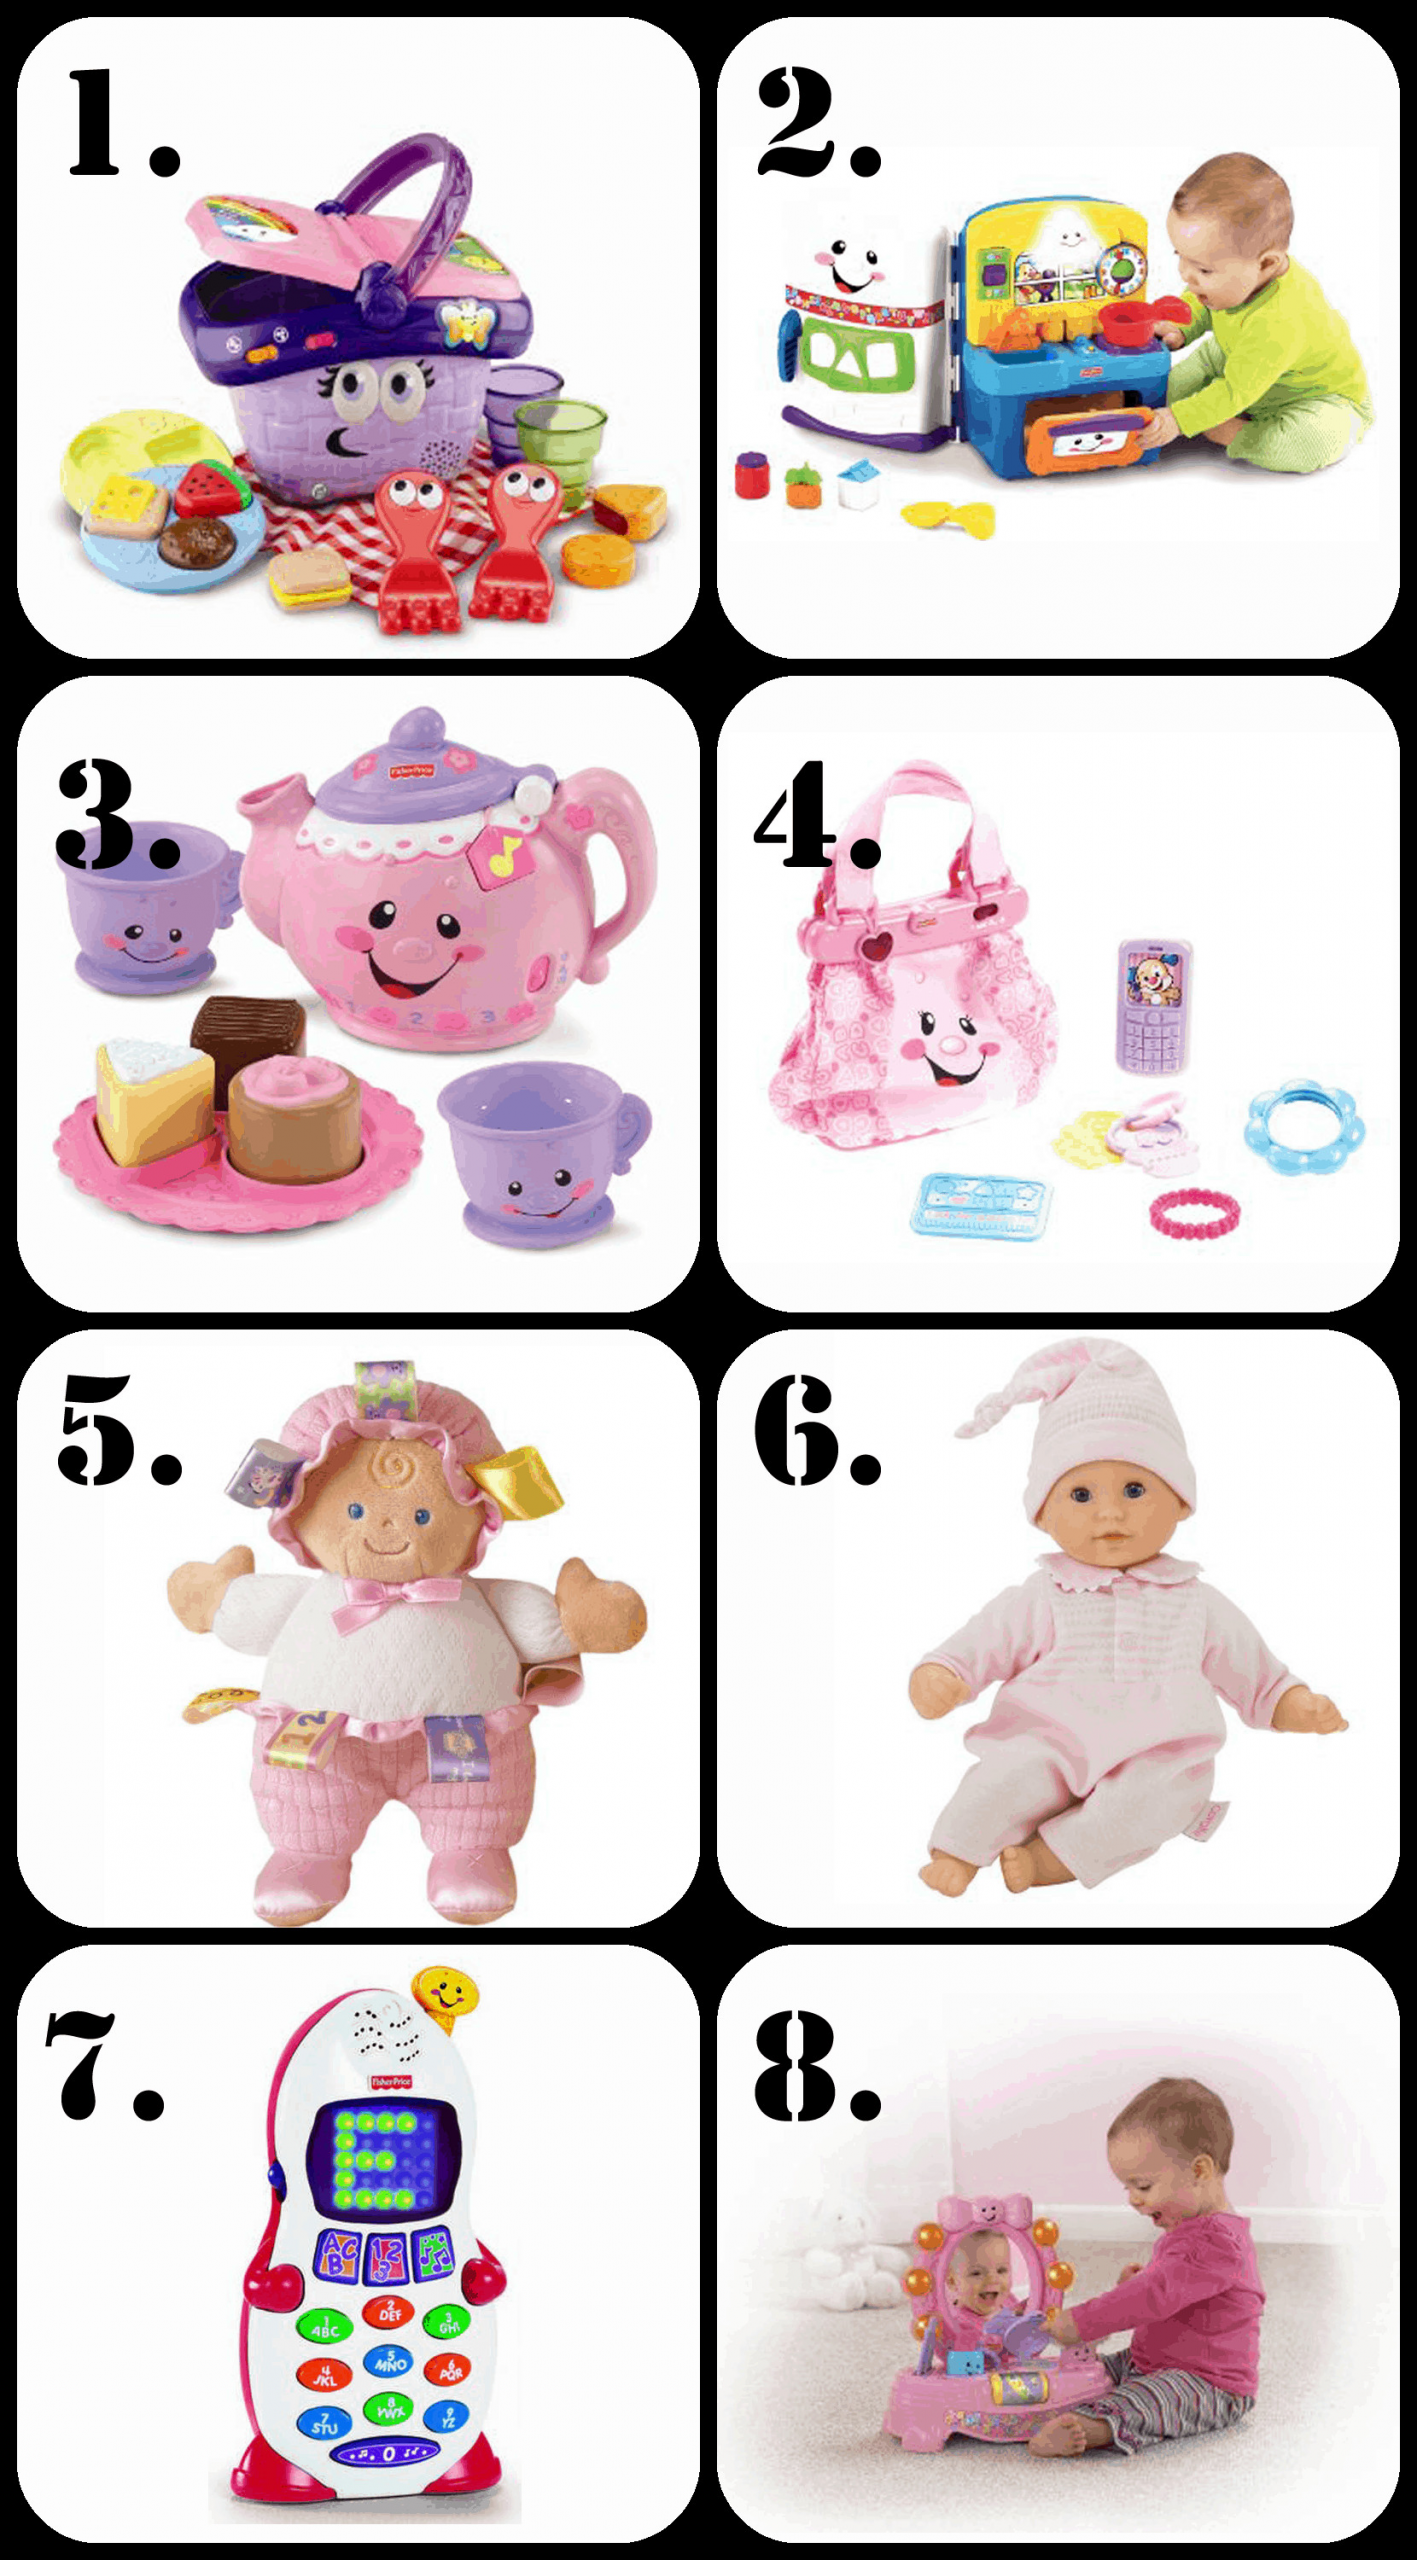 1 Year Girl Birthday Gift Ideas
 The Ultimate List of Gift Ideas for a 1 Year Old Girl